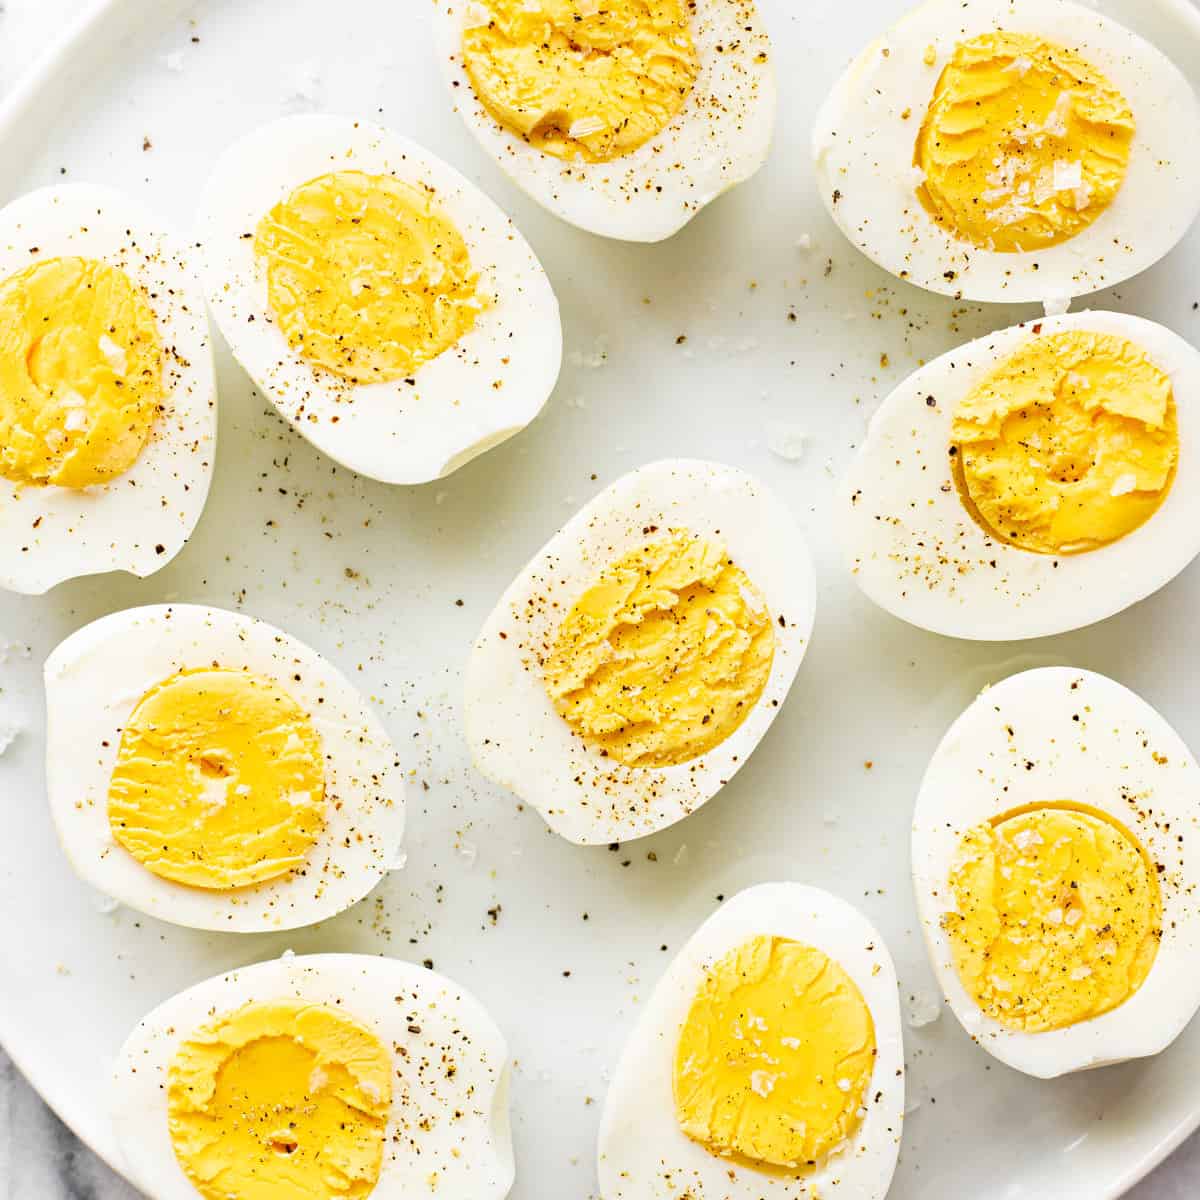 How to Make Hard Boiled Eggs in Air Fryer